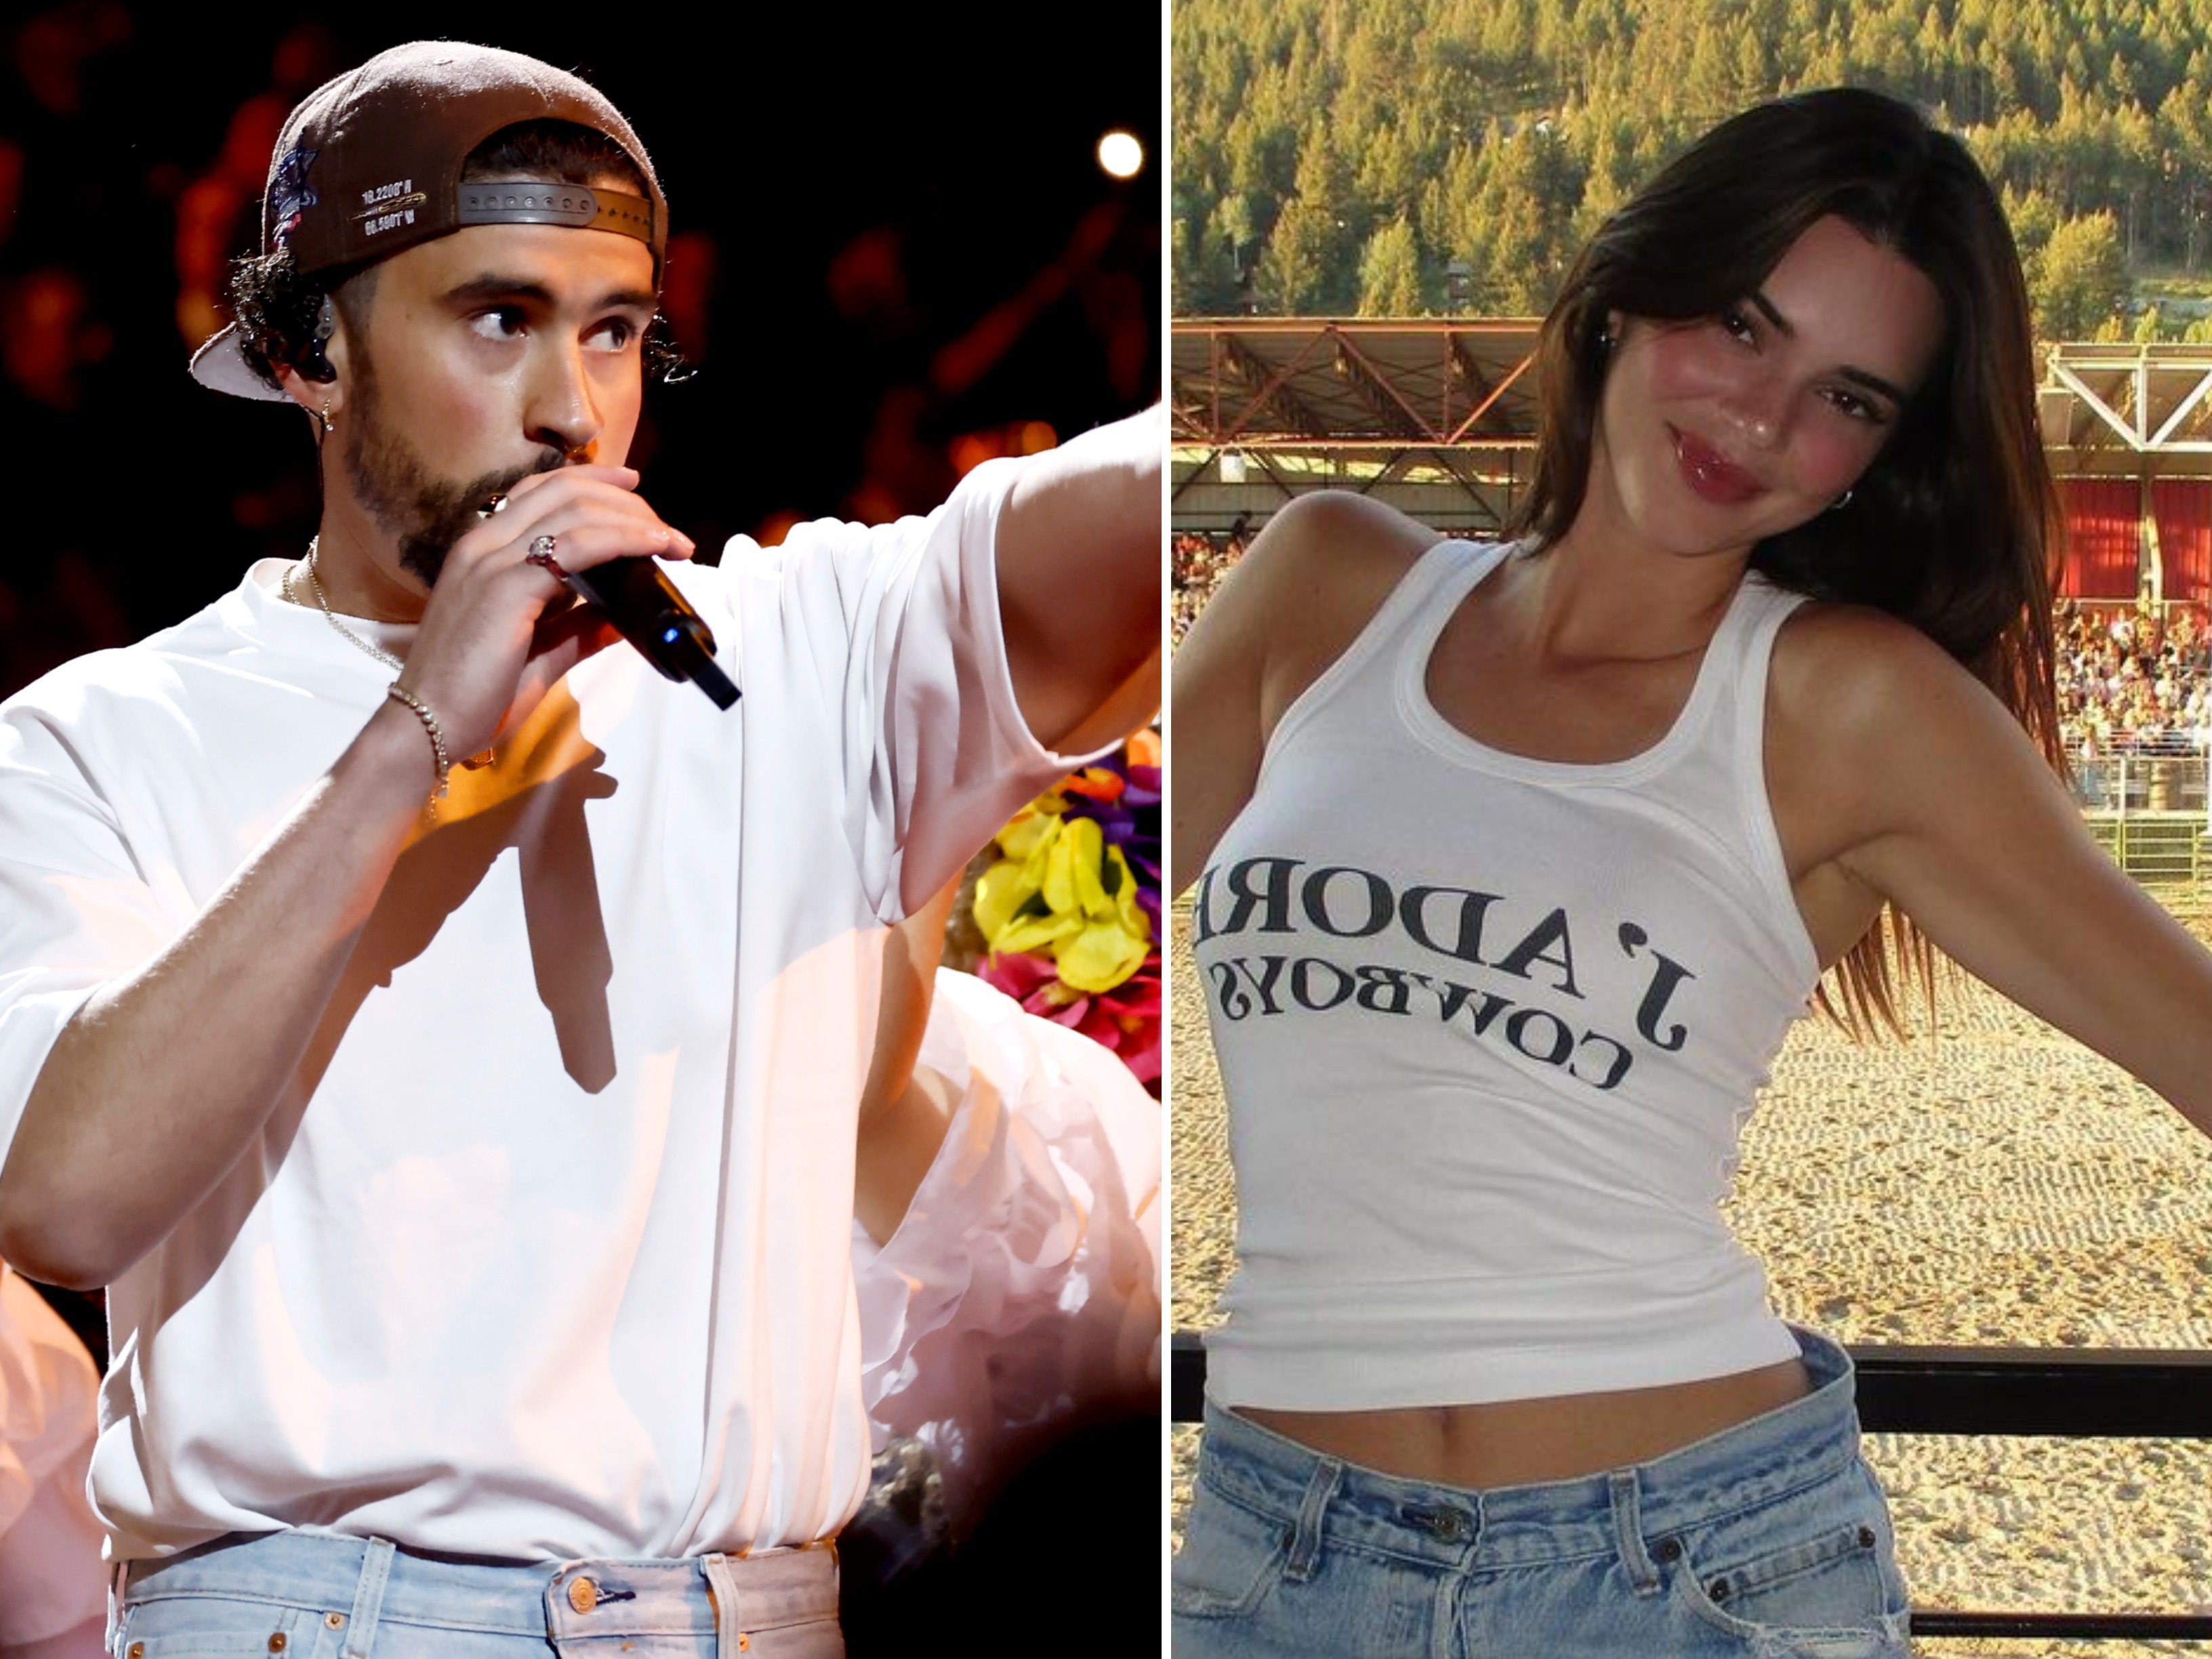 Is Bad Bunny so obsessed with Kendall Jenner that he wrote a whole song about her? Fans seem to think so... Photos: Getty Images; @kendalljenner/Instagram